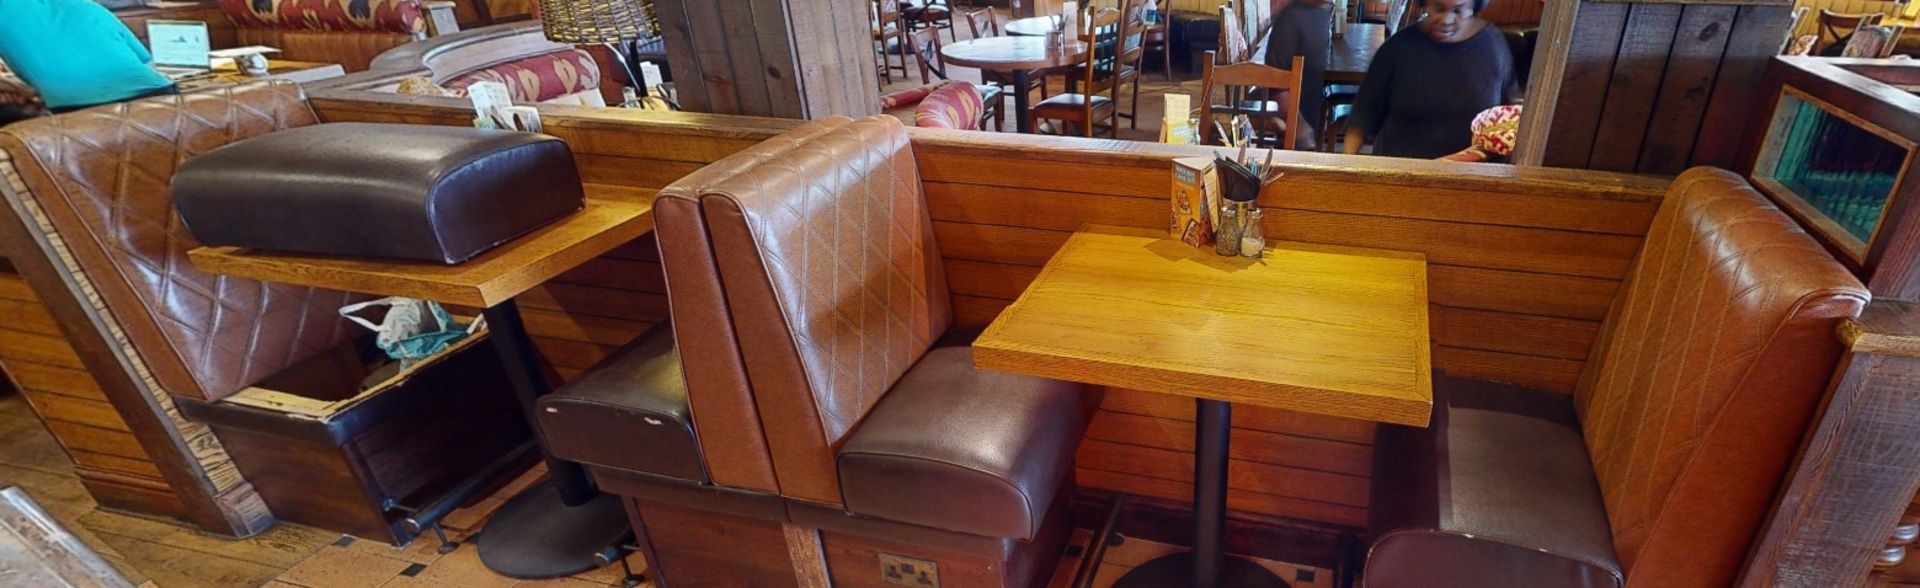 1 x Collection of Restaurant High Single Seat Seating Benches With Footrests - Includes 2 x End - Image 4 of 6